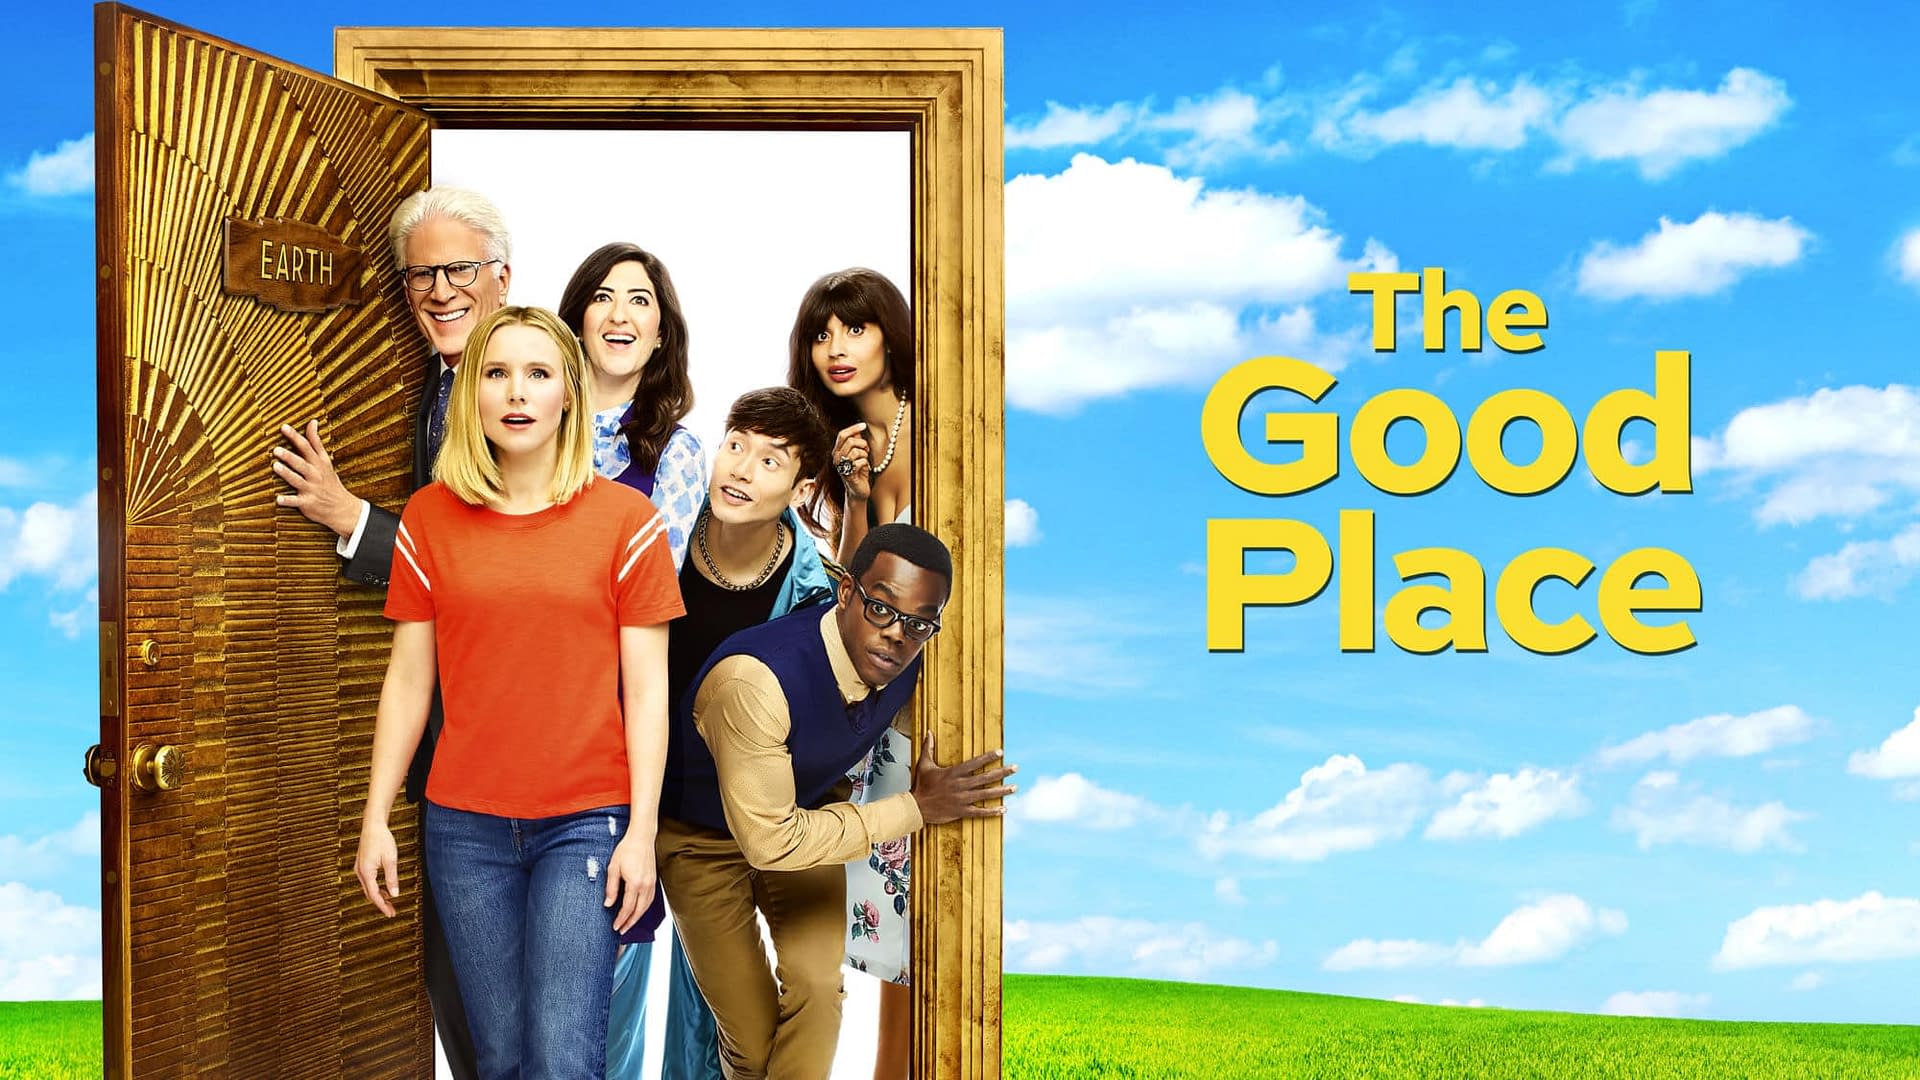 "The Good Place" Season 4: Mike Schur Teases Characters, Old and New